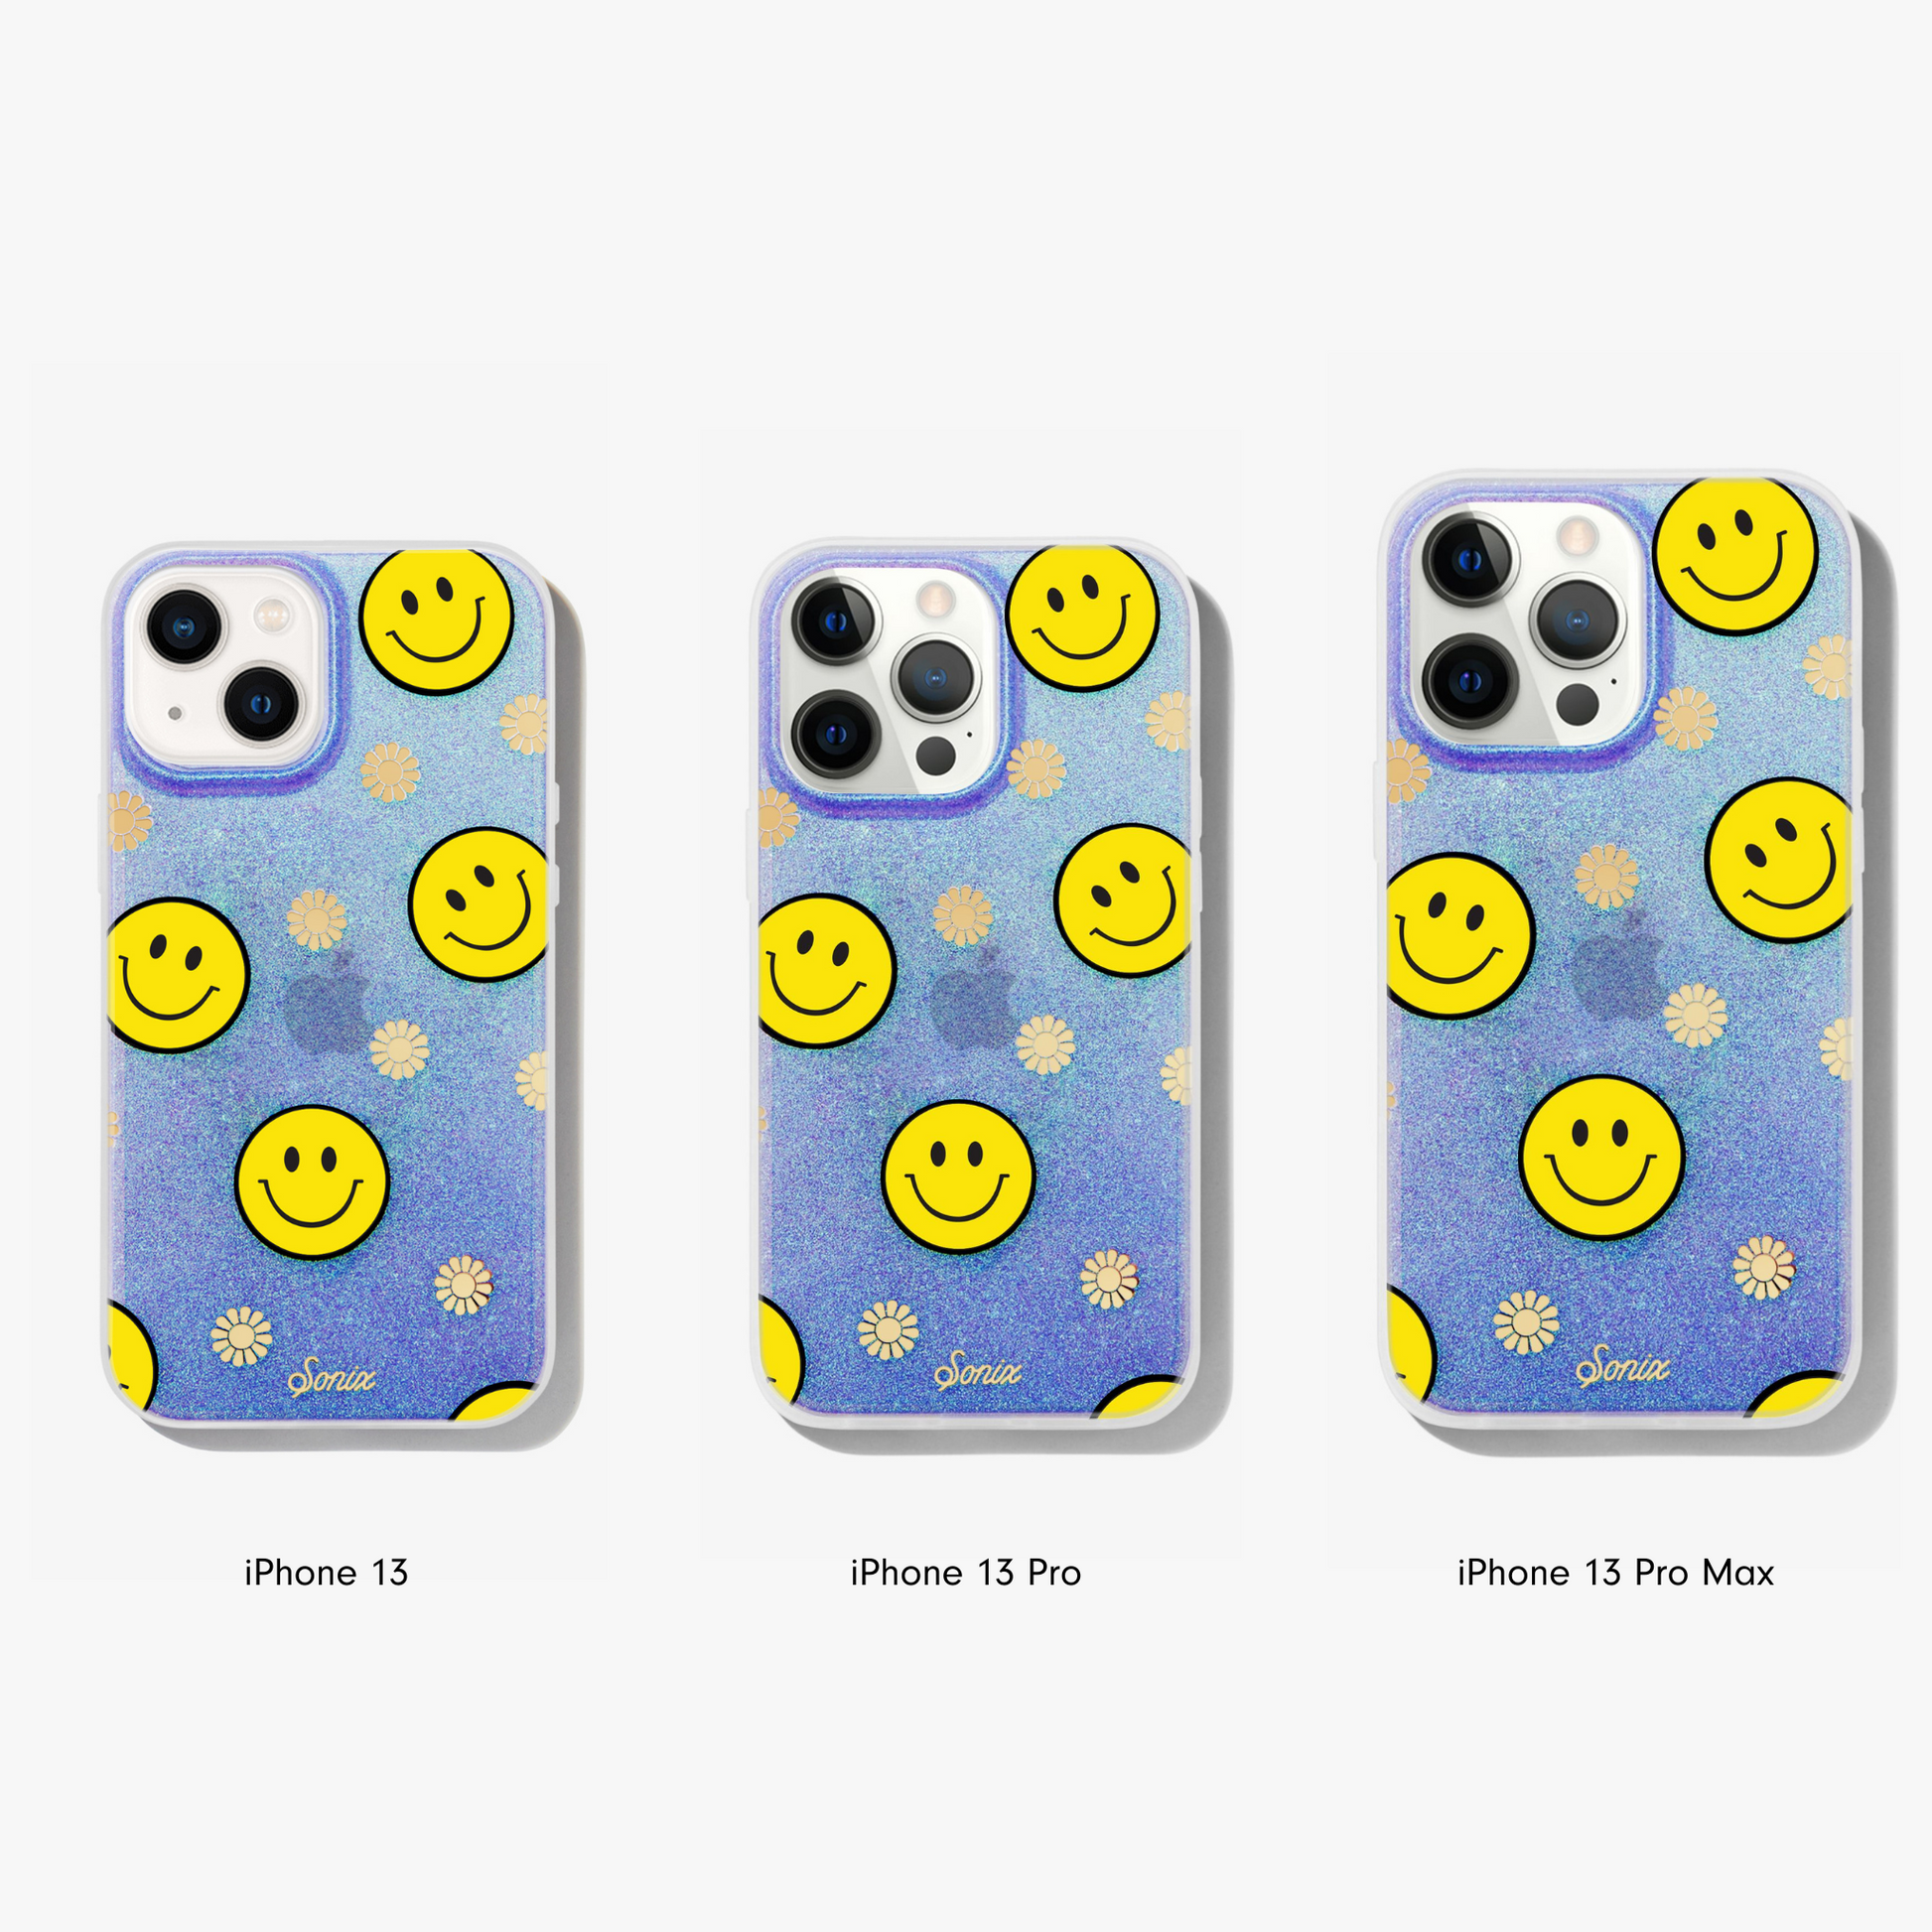 The clear purple case infused with iridescent glitter features happy faces and signature gold foil flowers shown on an iphone 13, iphone 13 pro, and an iphone 13 pro max